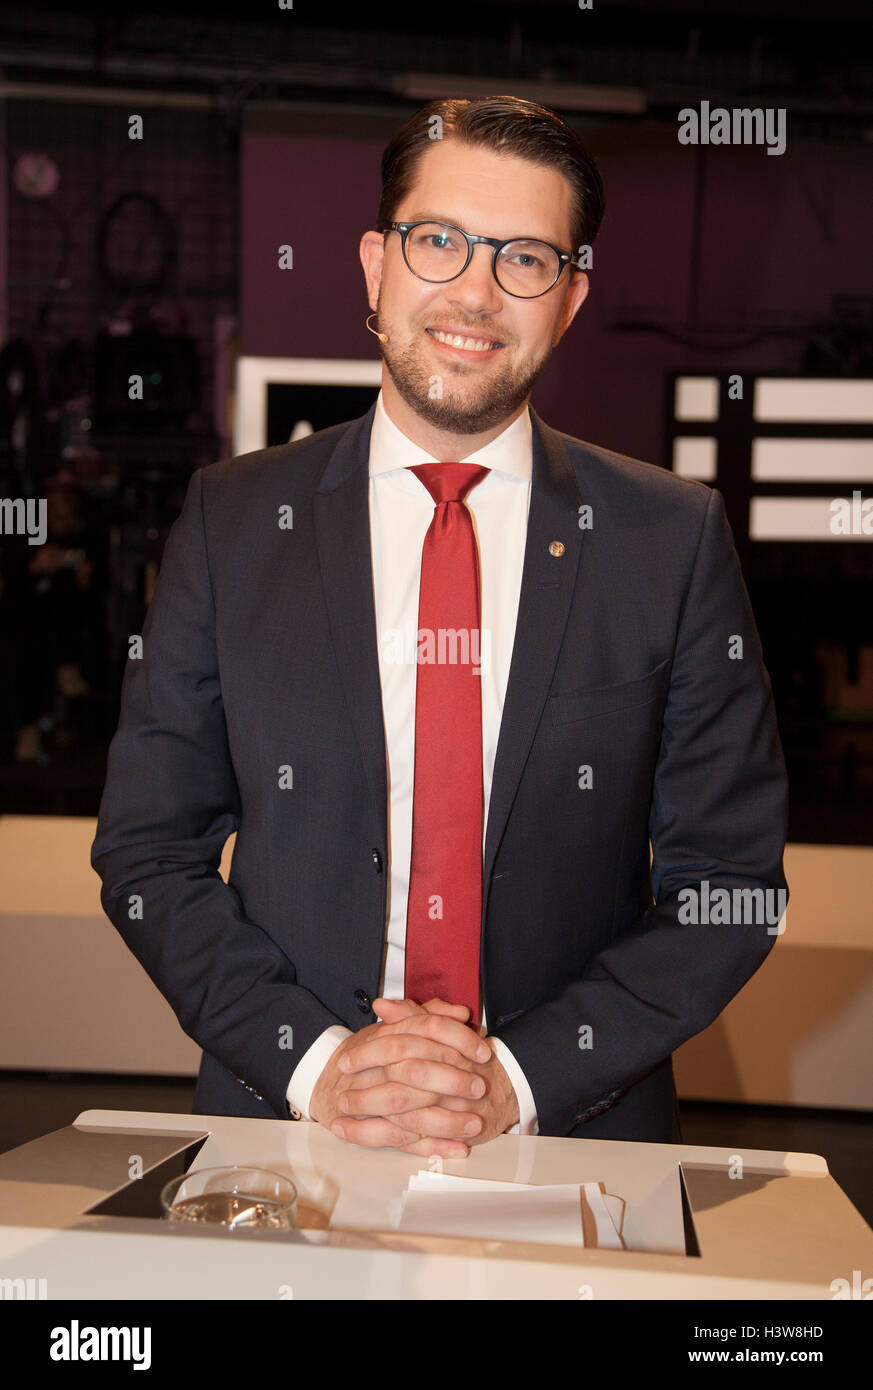 JIMMY ÅKESSON party leader Sweden Democrats on a debate on television Stock Photo